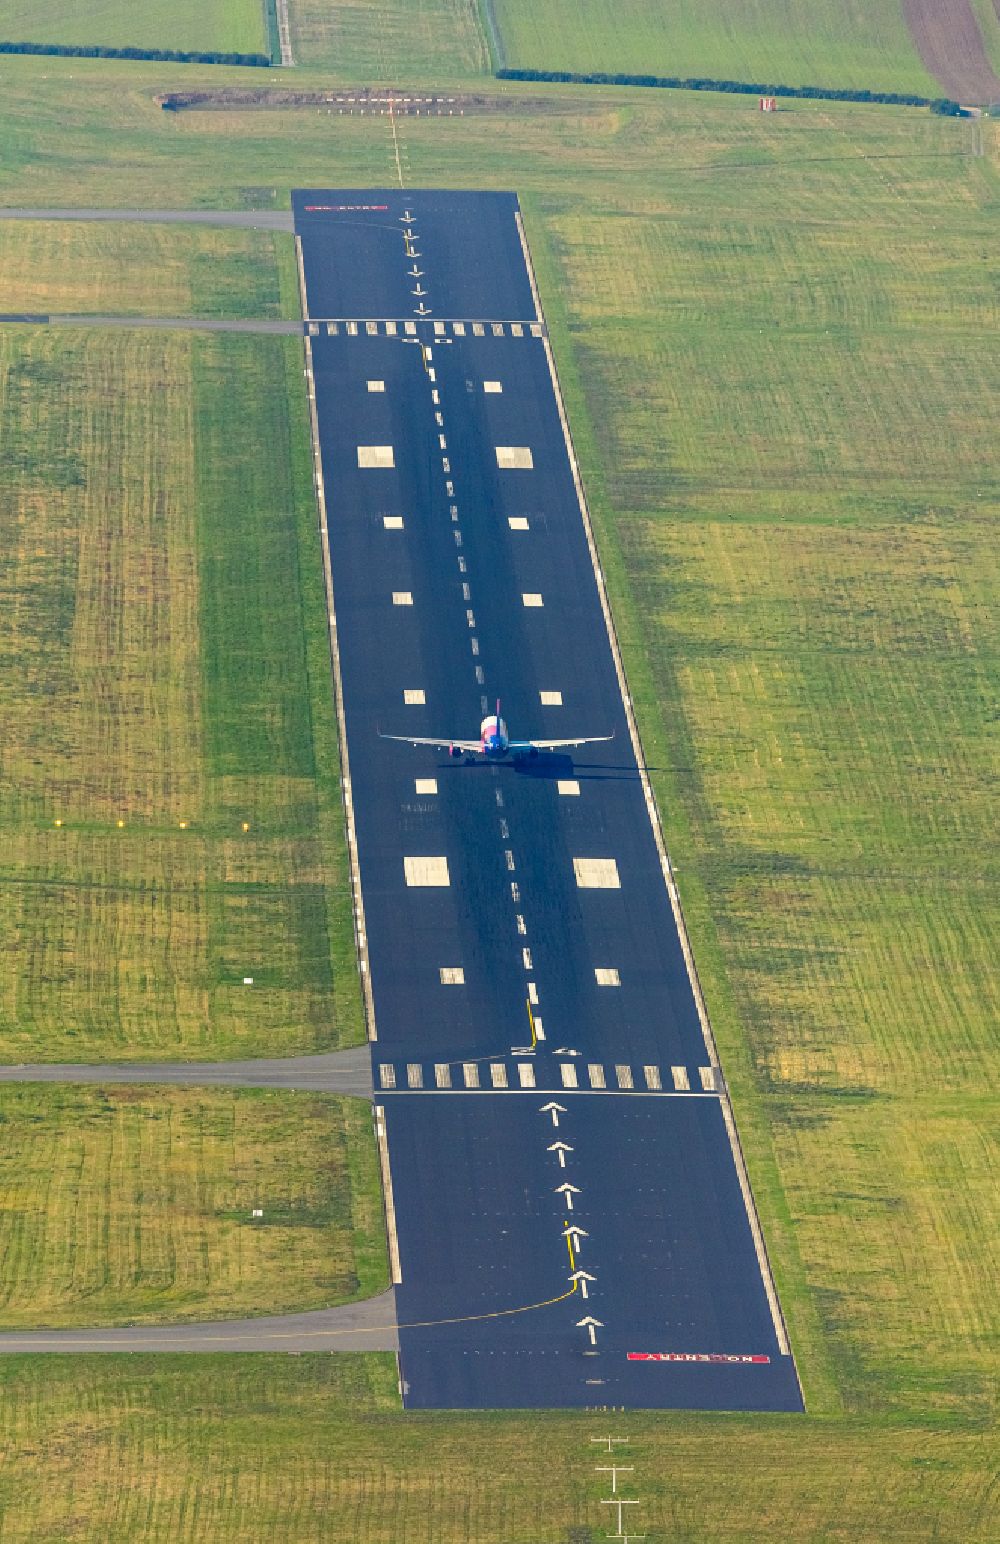 Aerial image Dortmund - Runway with hangar taxiways and terminals on the grounds of the airport in Dortmund in the state North Rhine-Westphalia, Germany